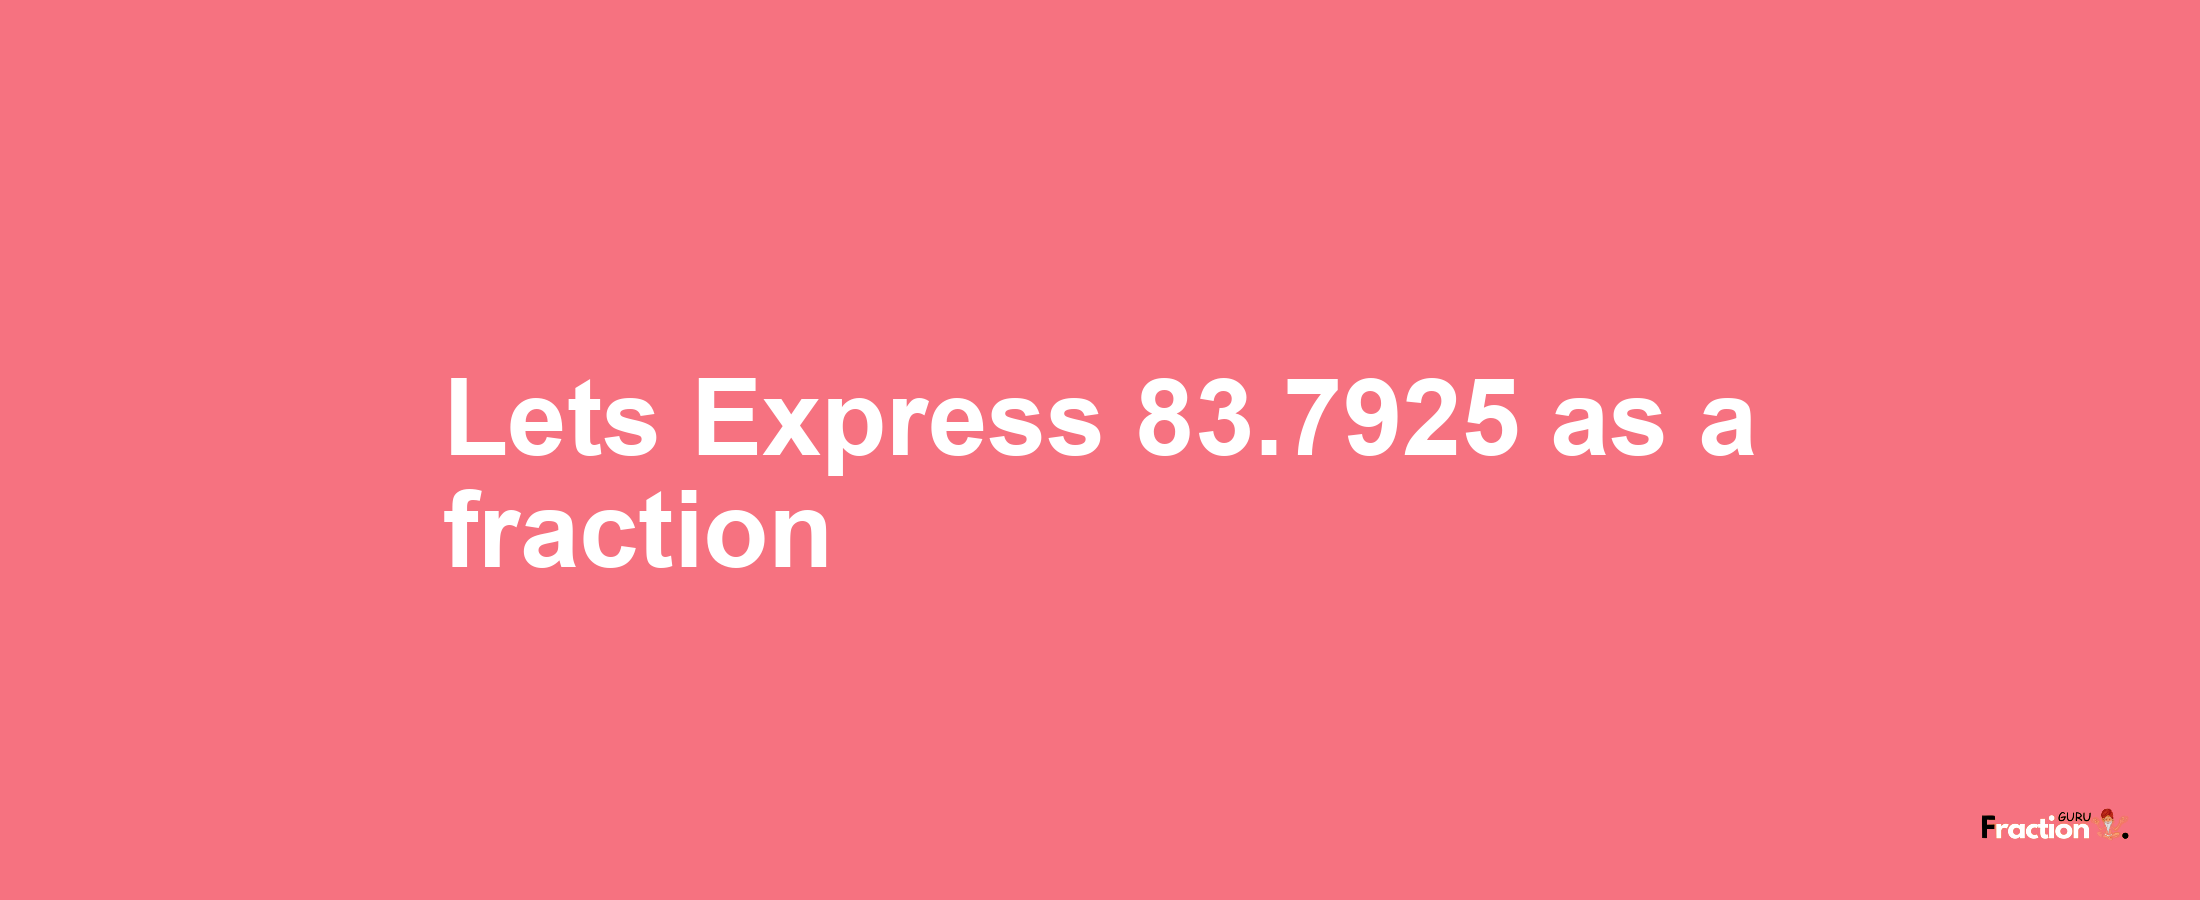 Lets Express 83.7925 as afraction